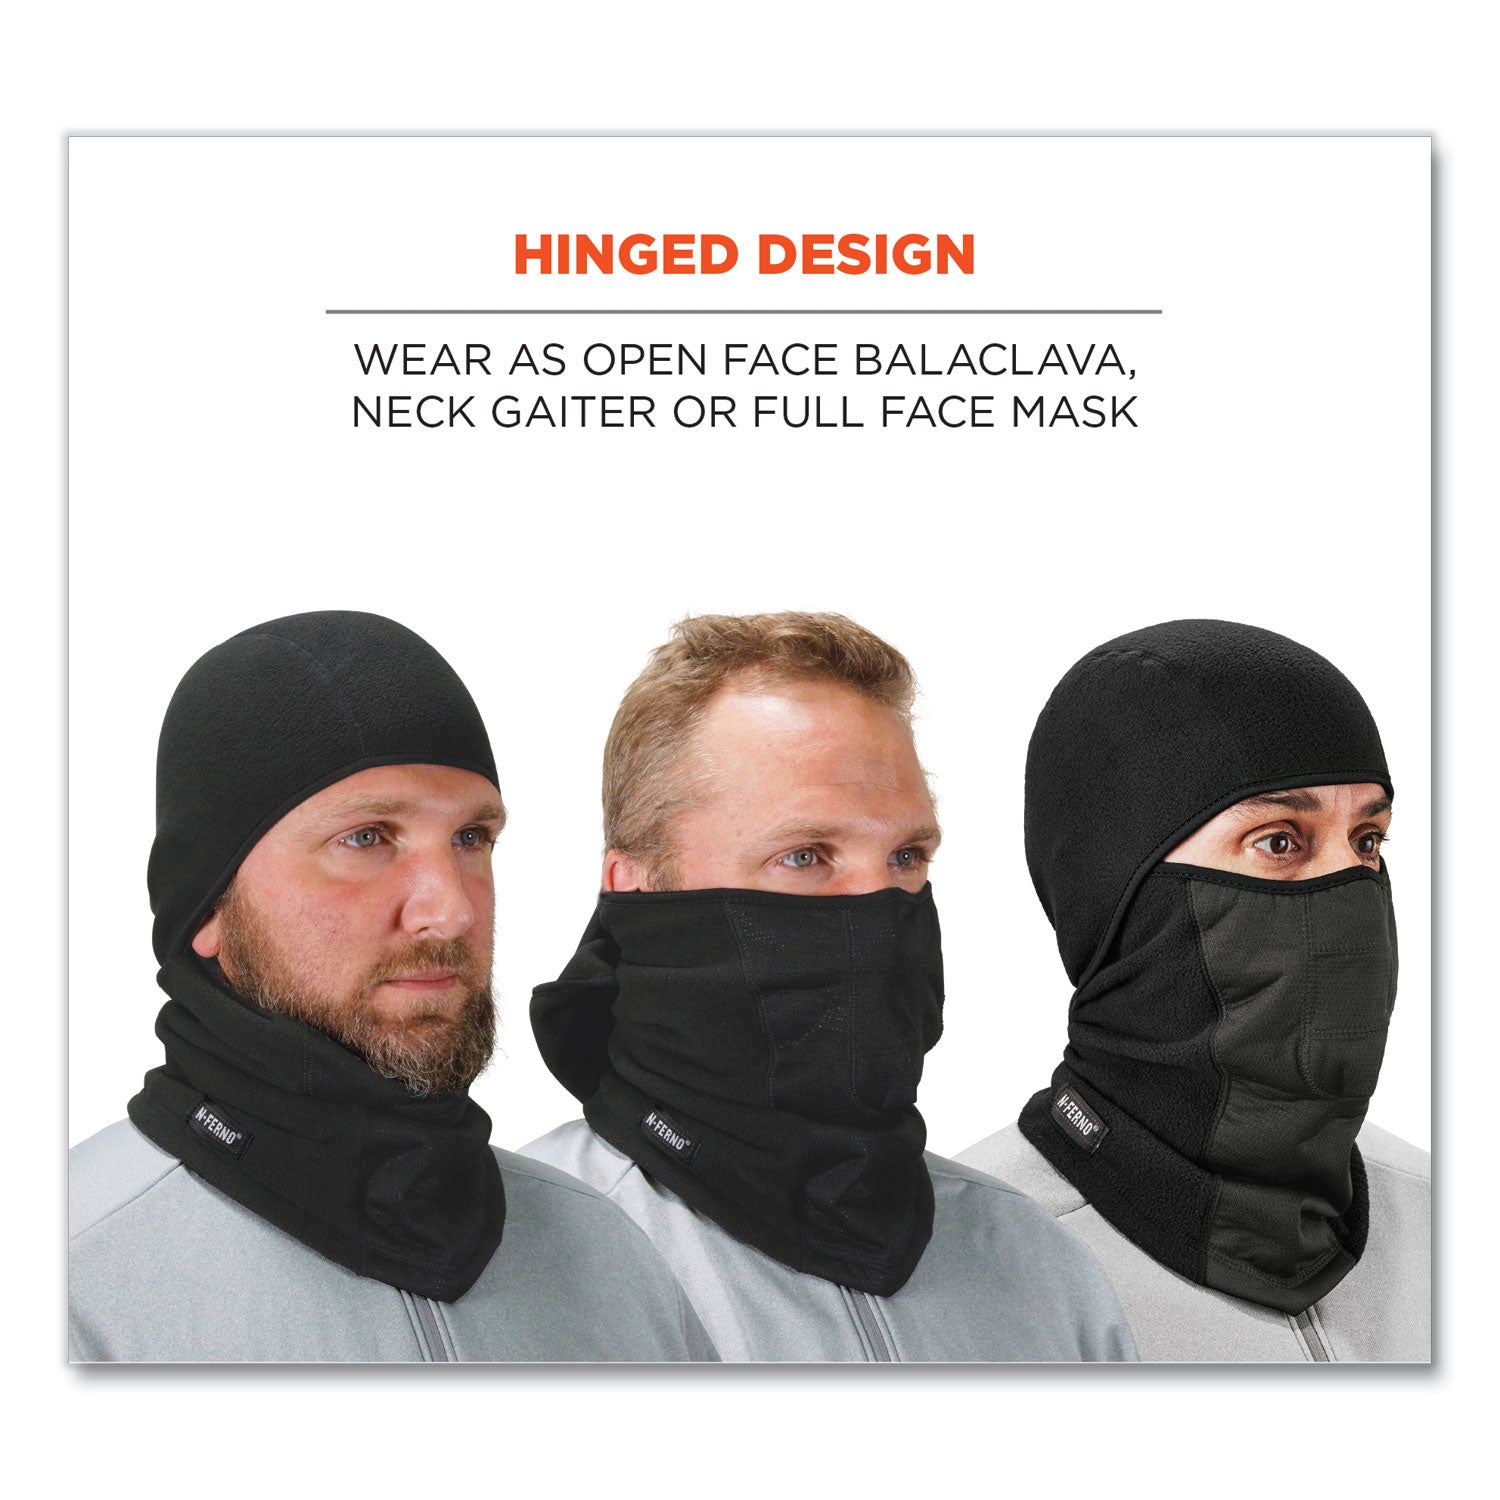 n-ferno-6823-hinged-balaclava-face-mask-fleece-one-size-fits-most-black-ships-in-1-3-business-days_ego16823 - 6